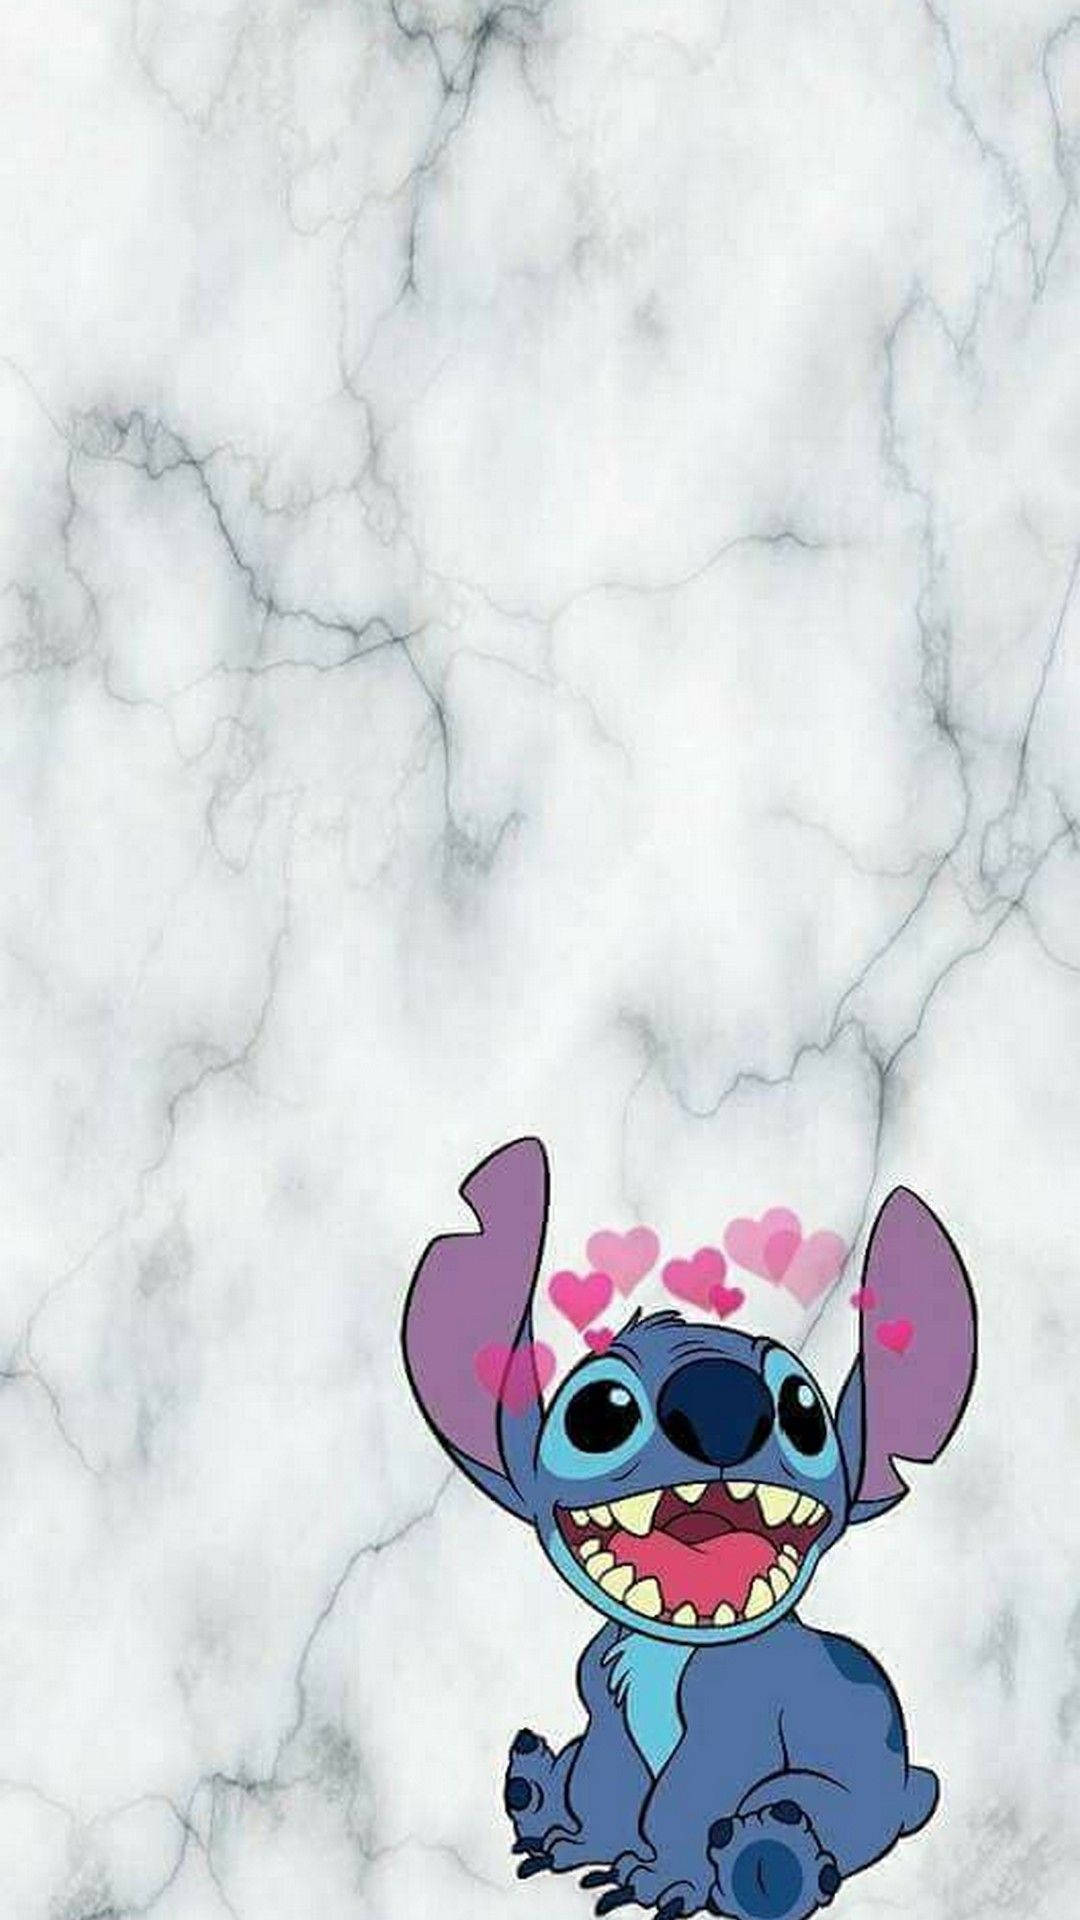 Cute Aesthetic Stitch With Heart Emojis